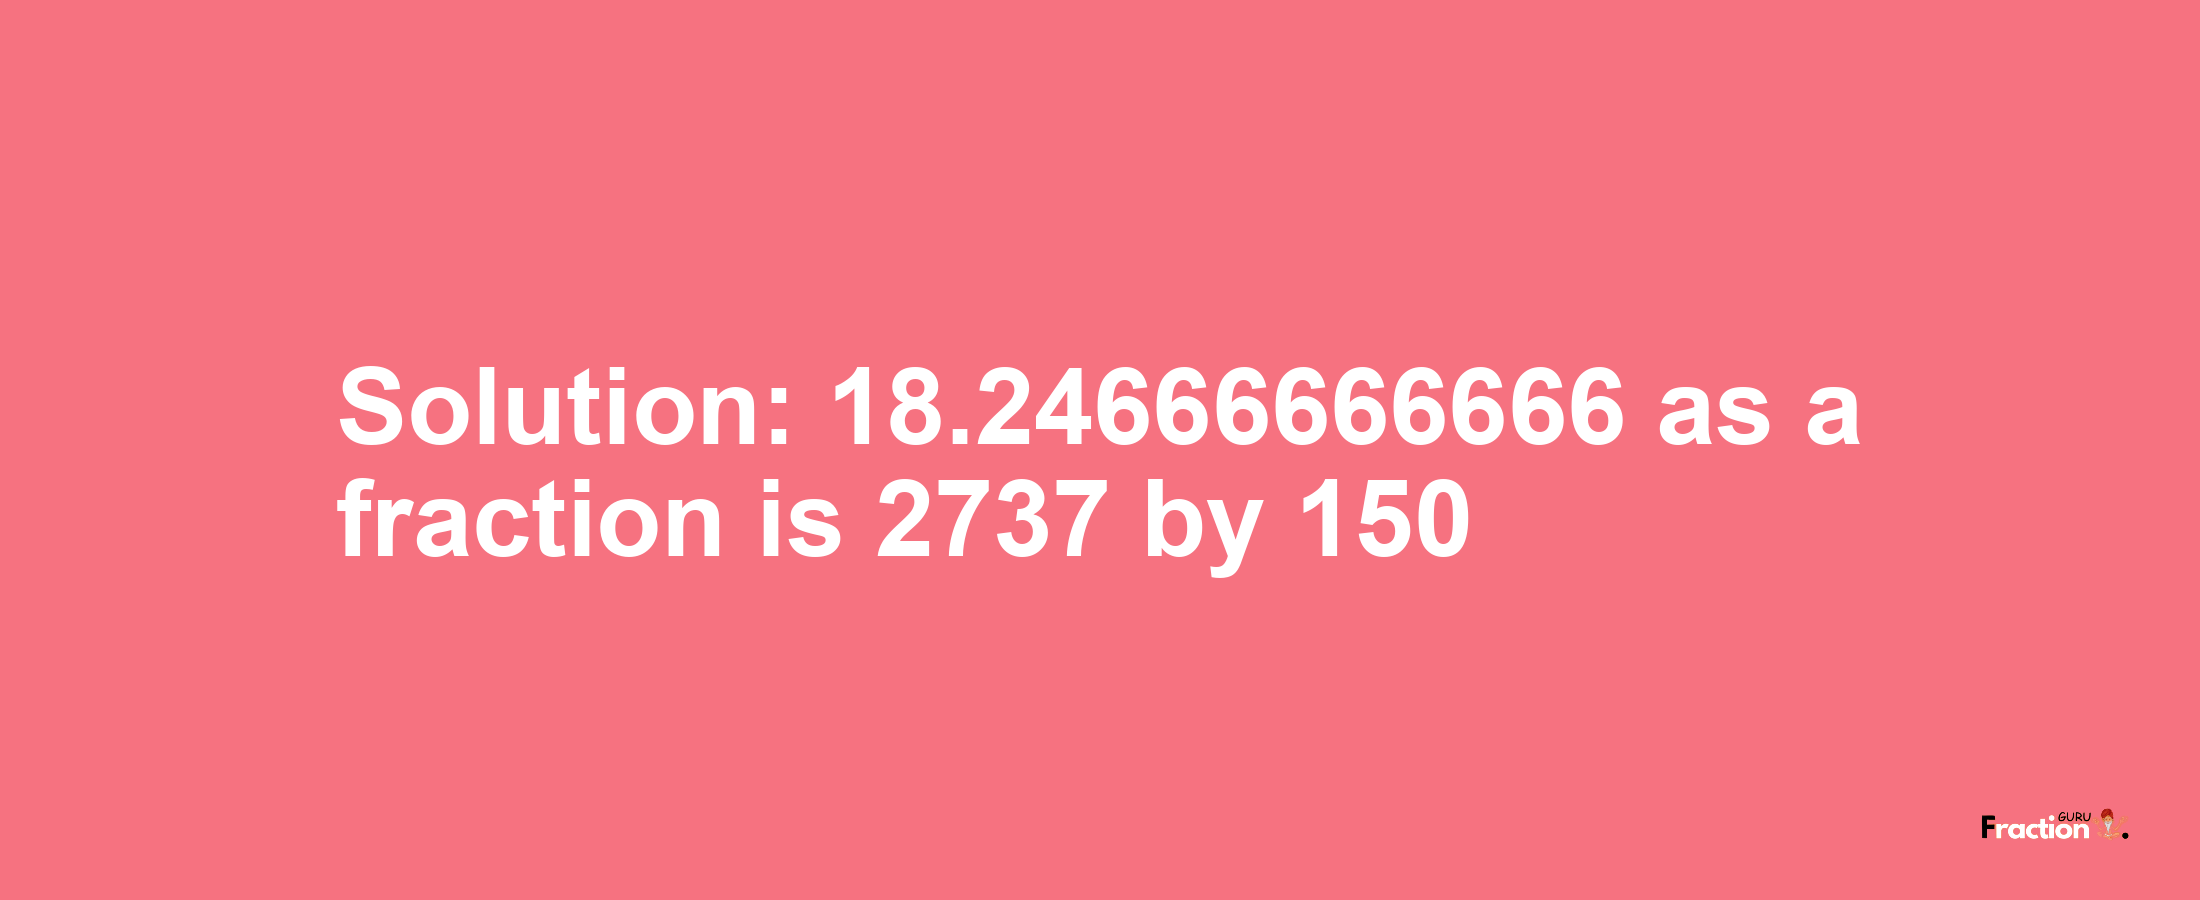 Solution:18.24666666666 as a fraction is 2737/150